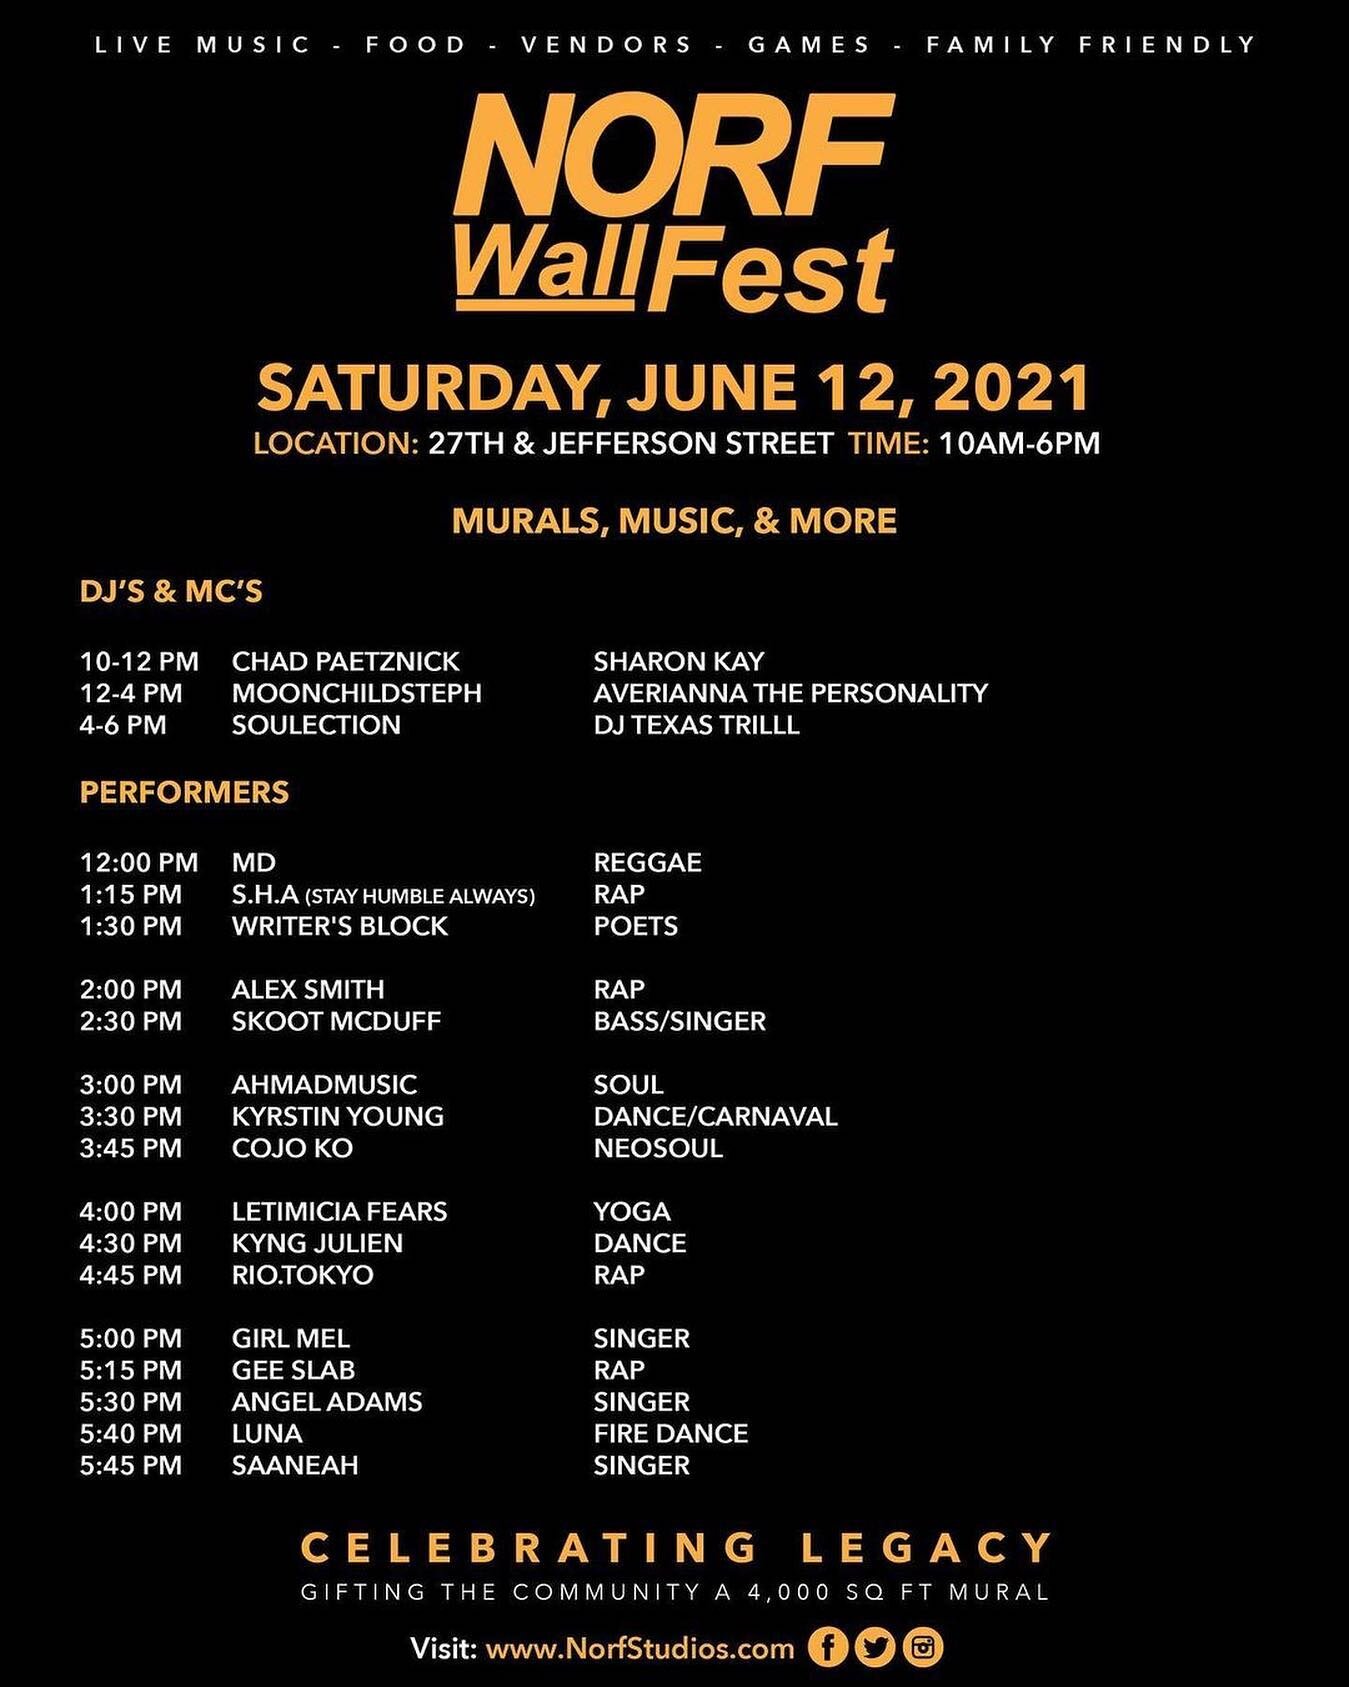 Repost&bull; @norfwallfest Zone 1: Murals, Music, and More LINEUP!
Zone 2: Food and Families (bring lawn chair)
Zone 3: Vendors
Zone 4: Kid Zone!! 

TODAY! OPEN TO THE PUBLIC

Norf Wall Fest
Saturday, June 12, 2021
Community Block Party 
10am-6pm

#n